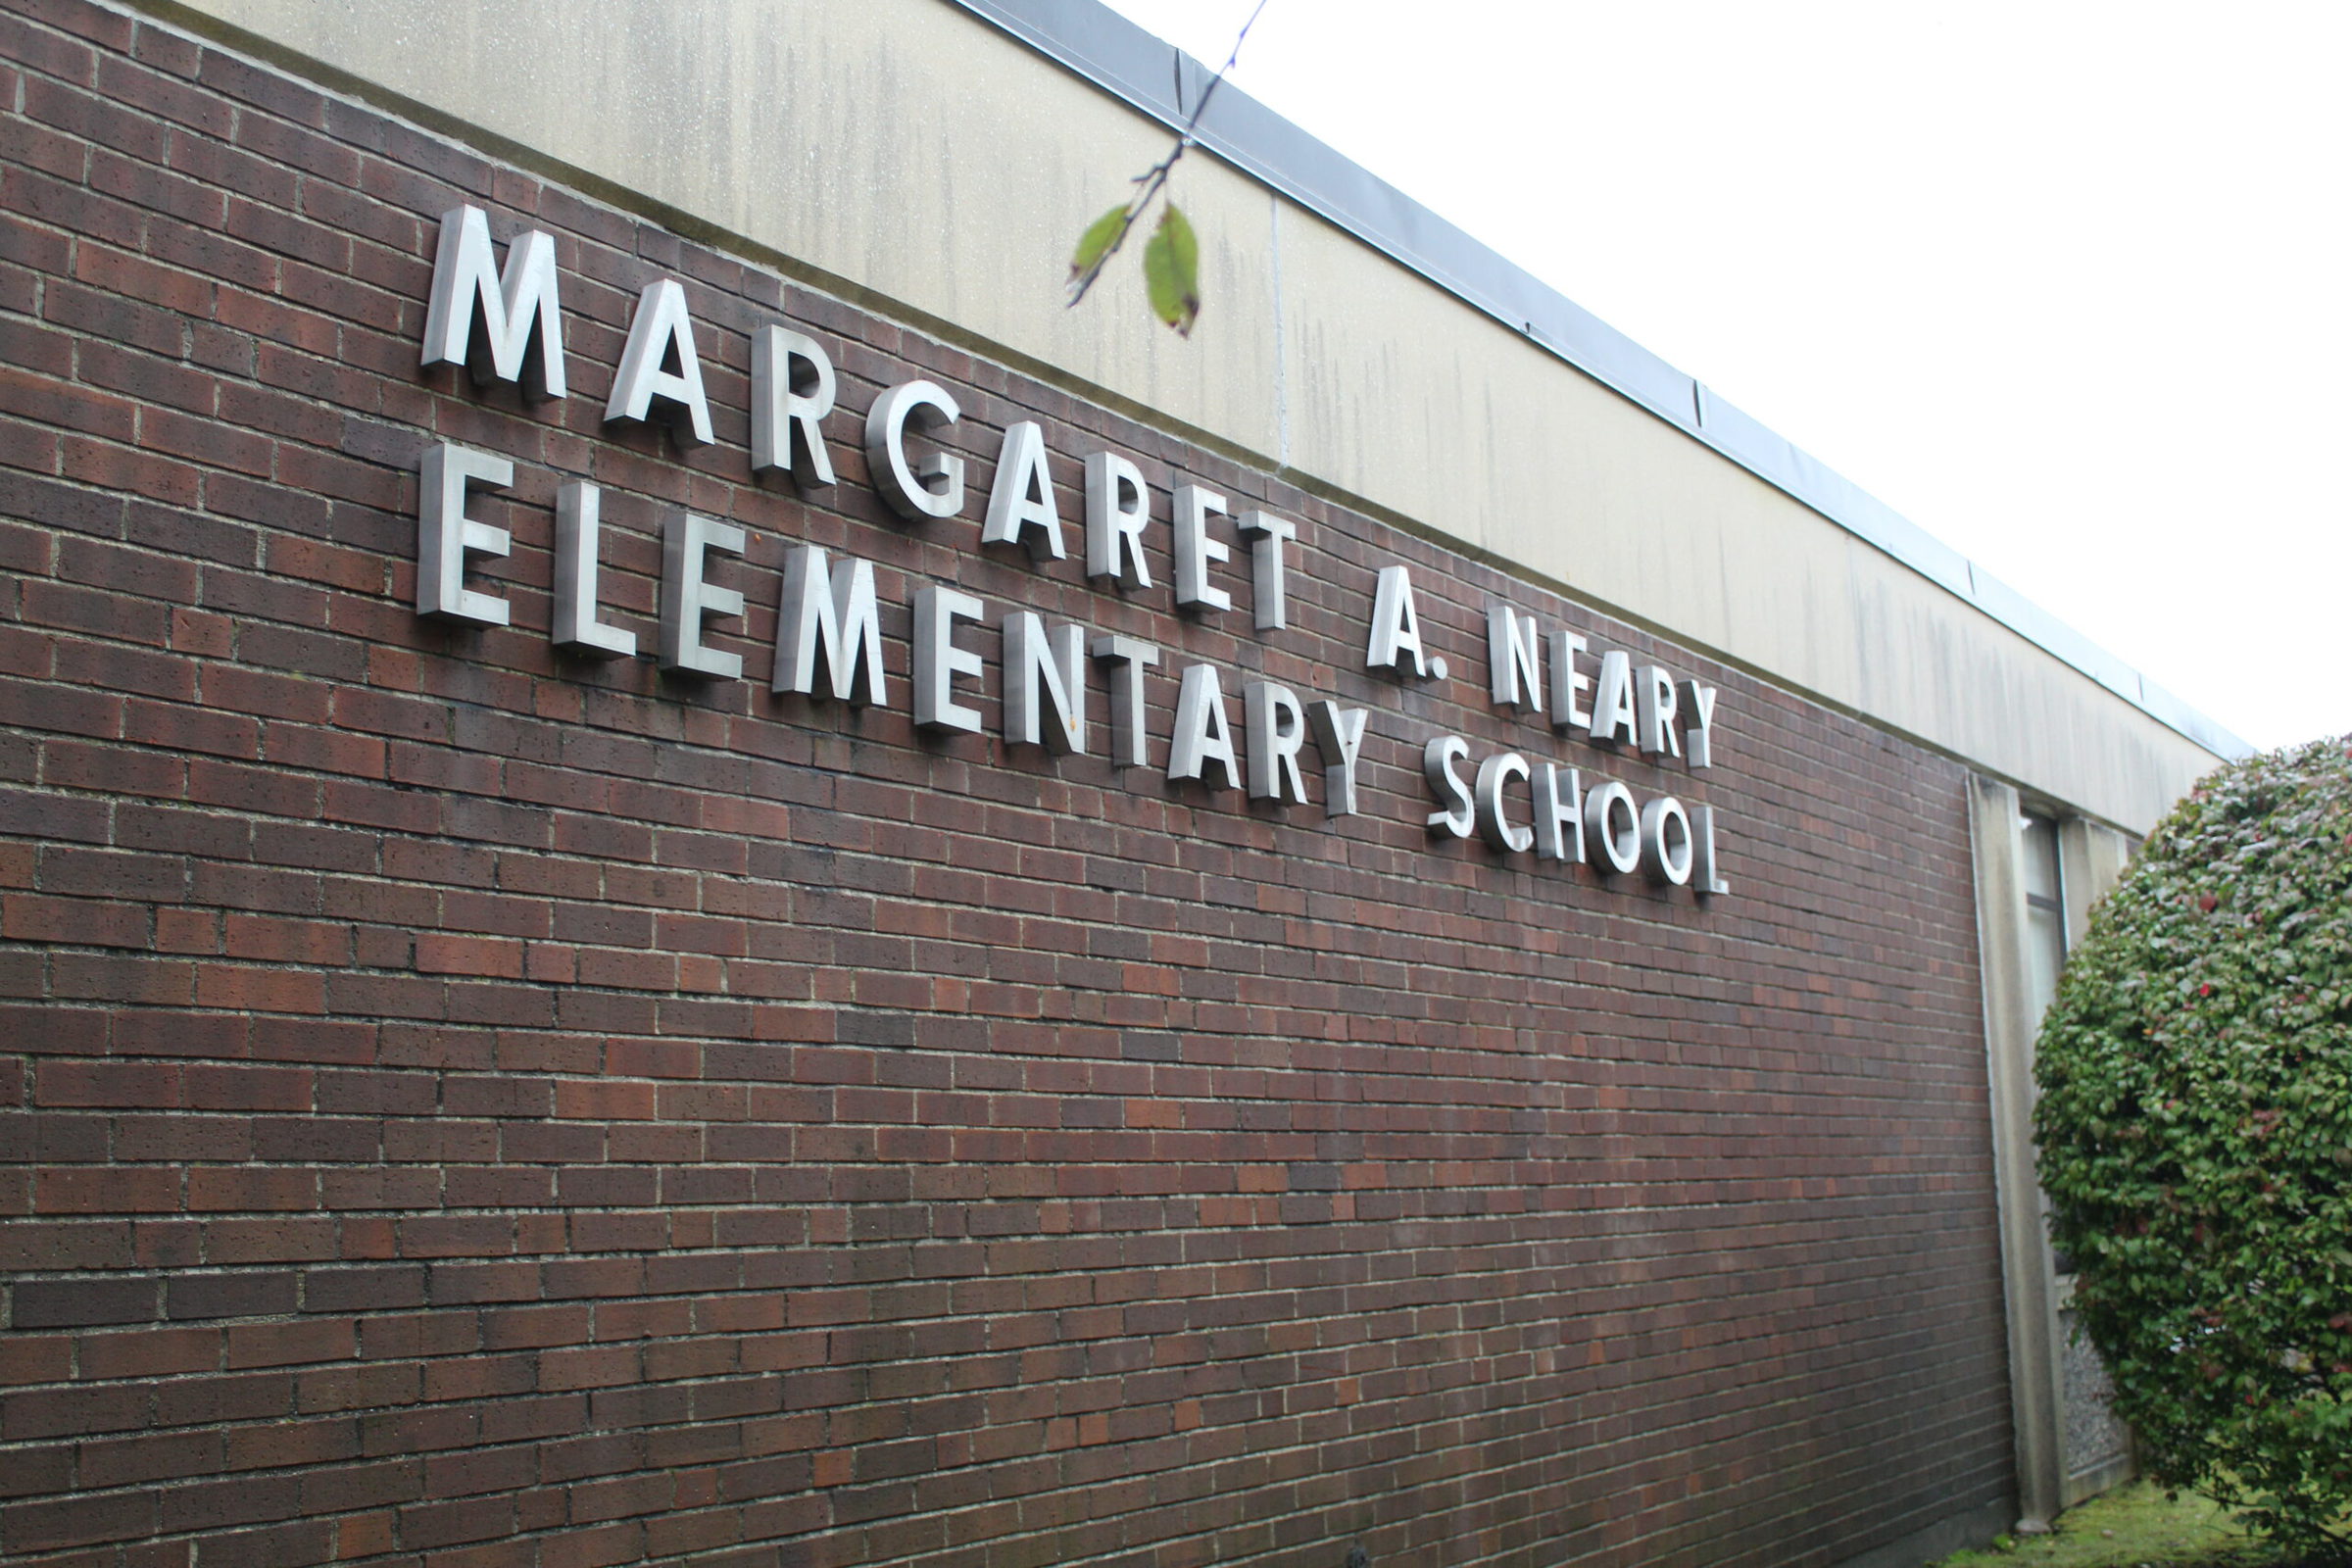 The Margaret A. Neary Elementary School is located at 53 Parkerville Rd.